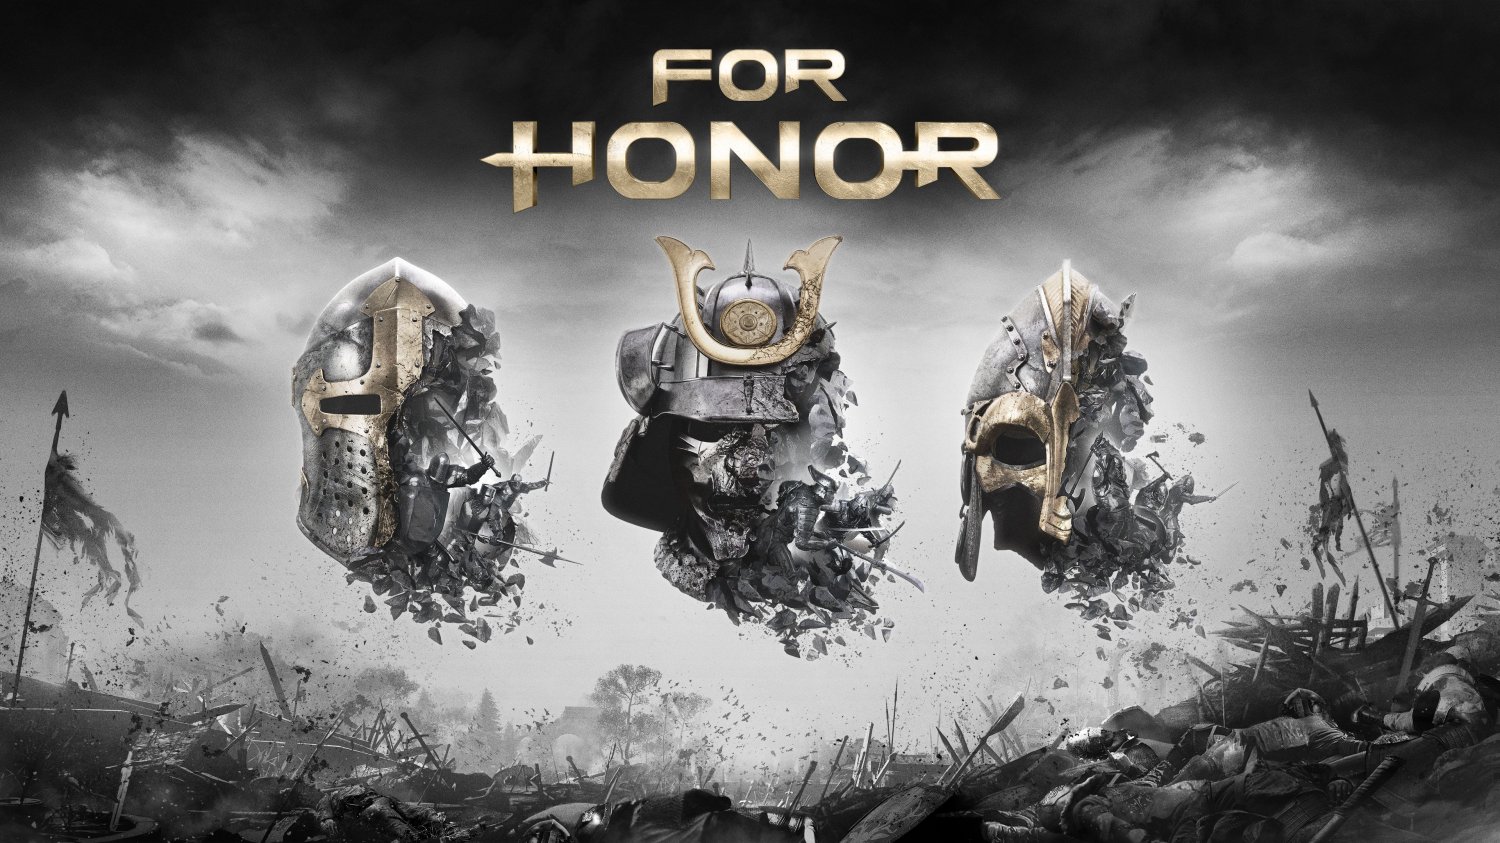 For Honor Game  13"x19" (32cm/49cm) Polyester Fabric Poster